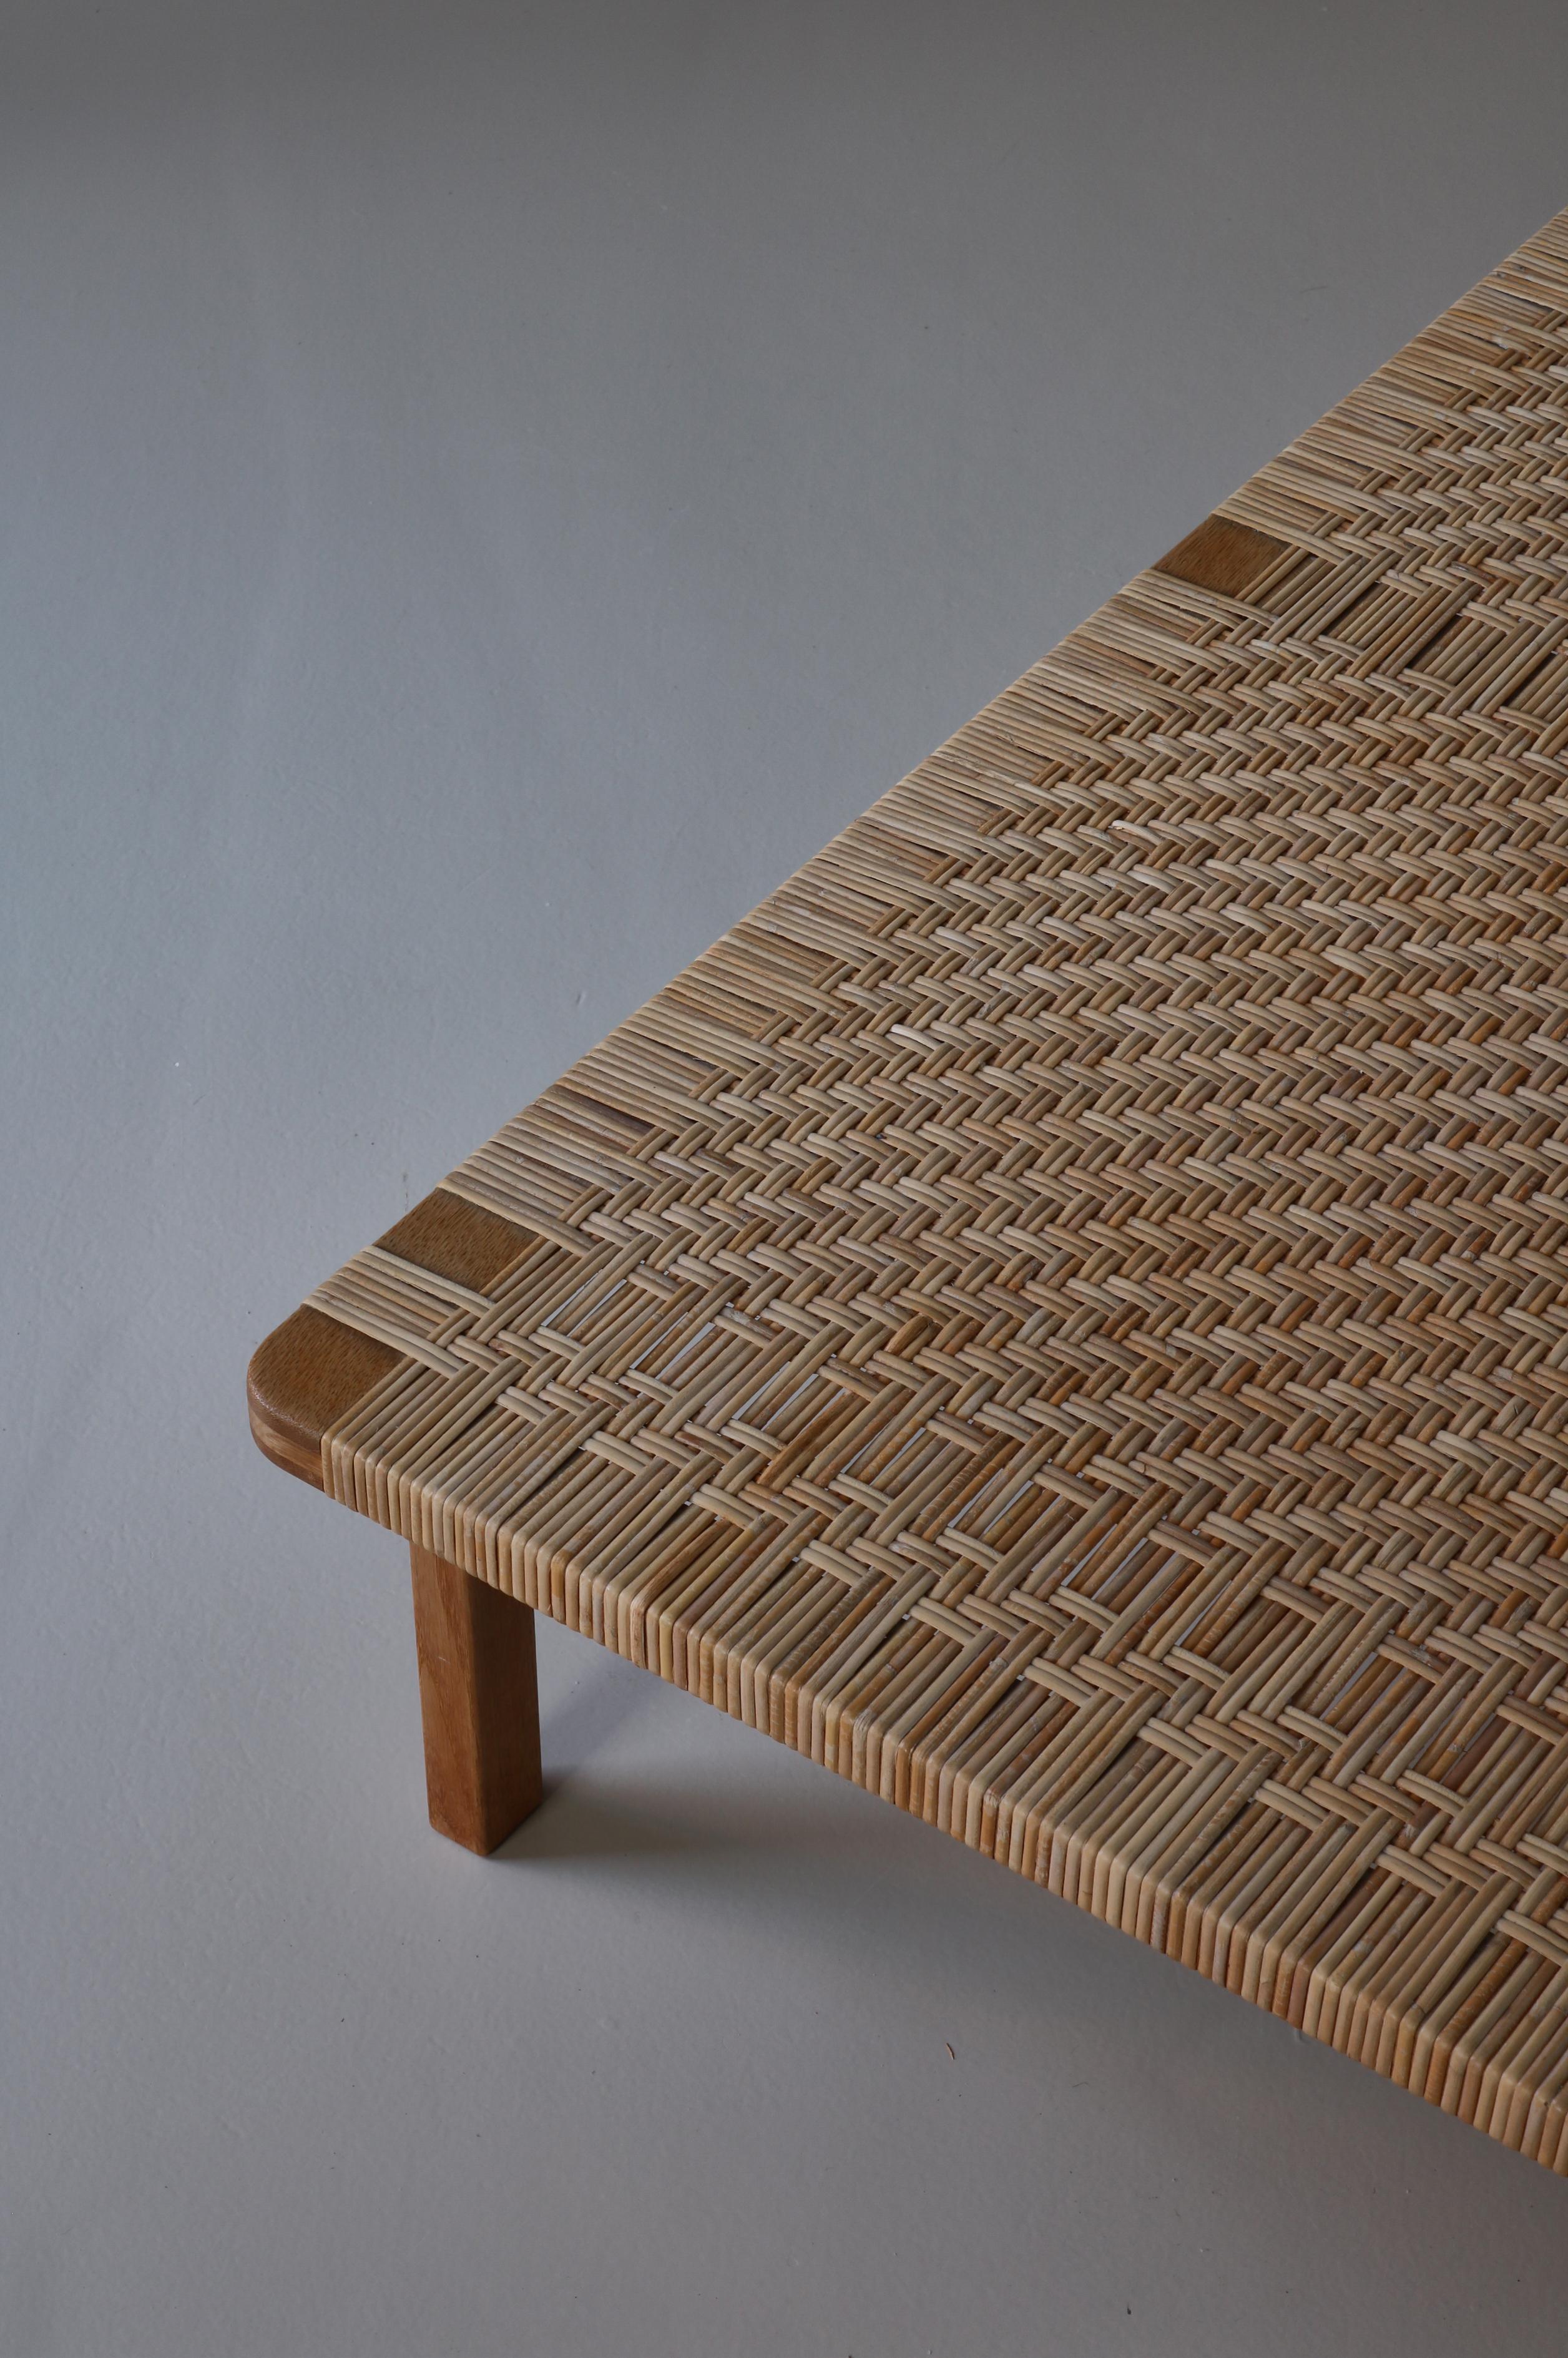 Borge Mogensen Large Side Table or Bench in Oak and Rattan Cane, 1960s, Denmark For Sale 5